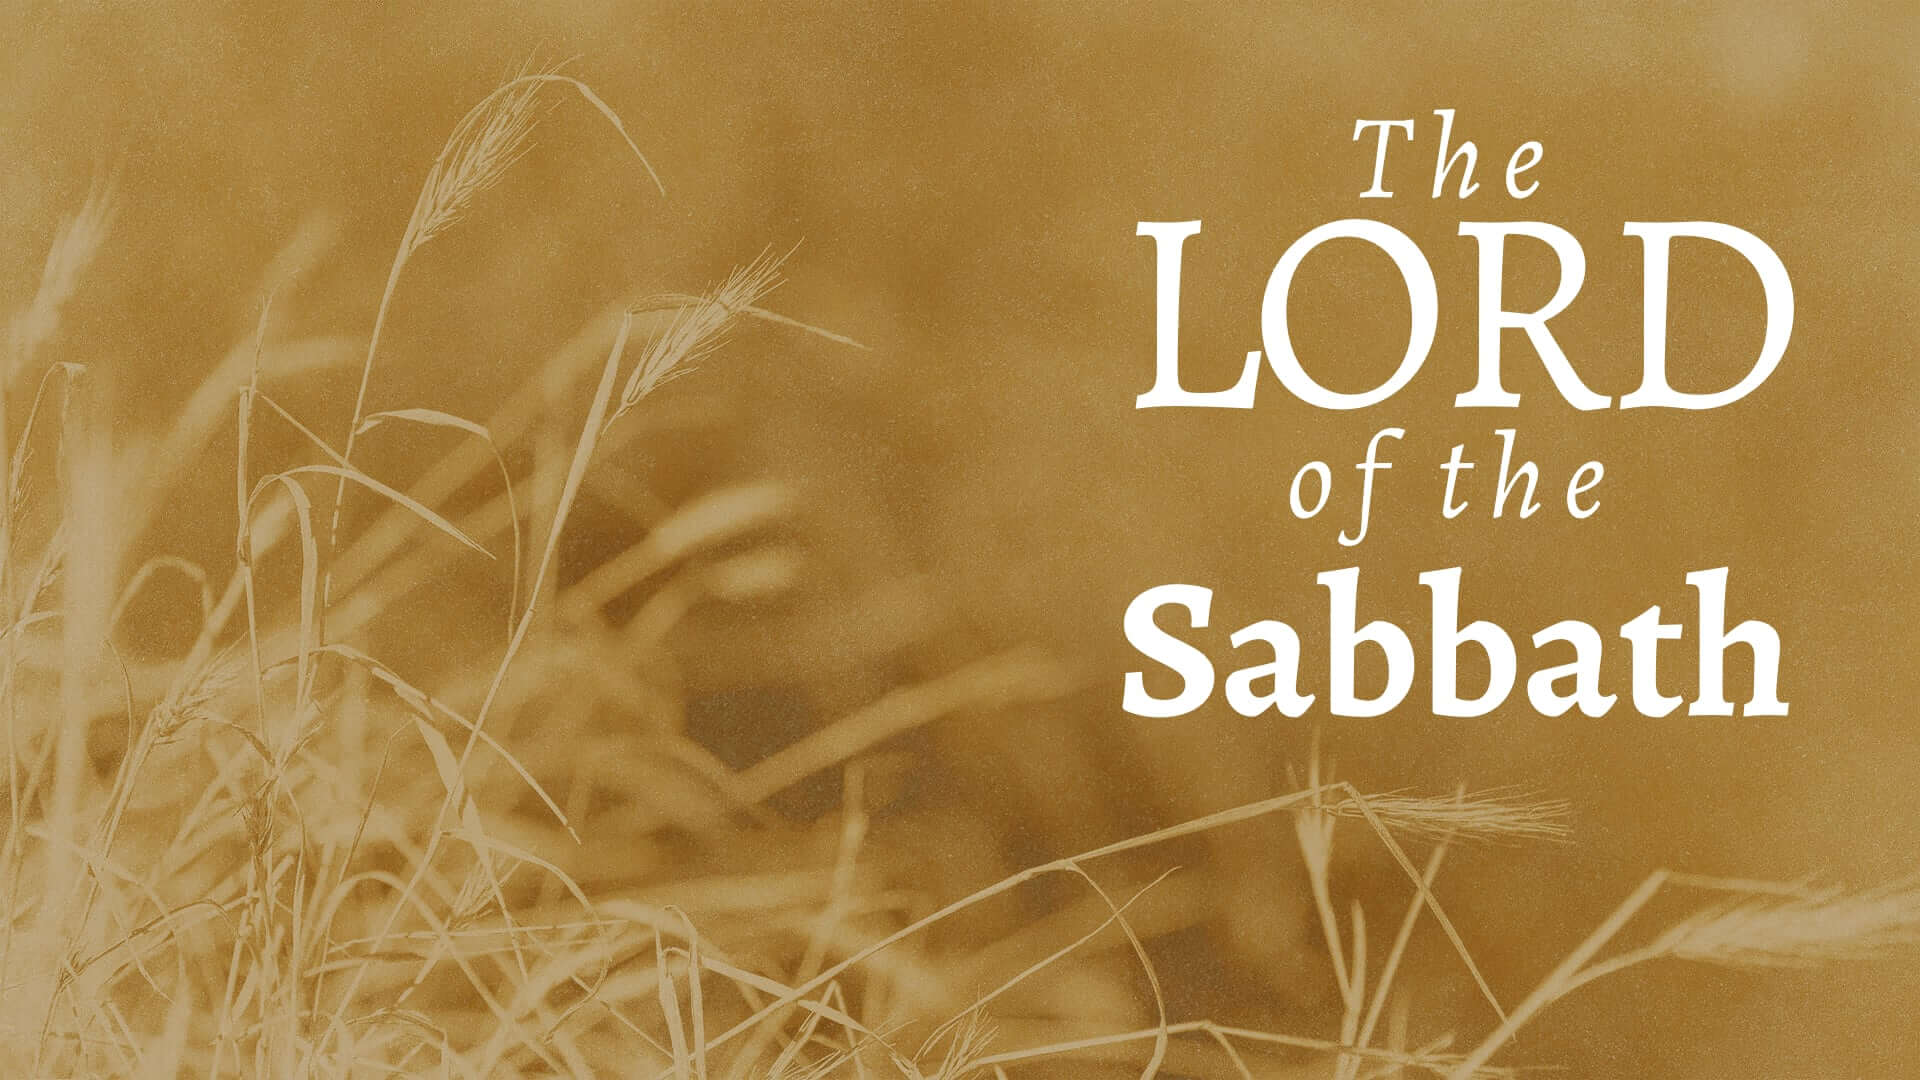 The Lord of the Sabbath